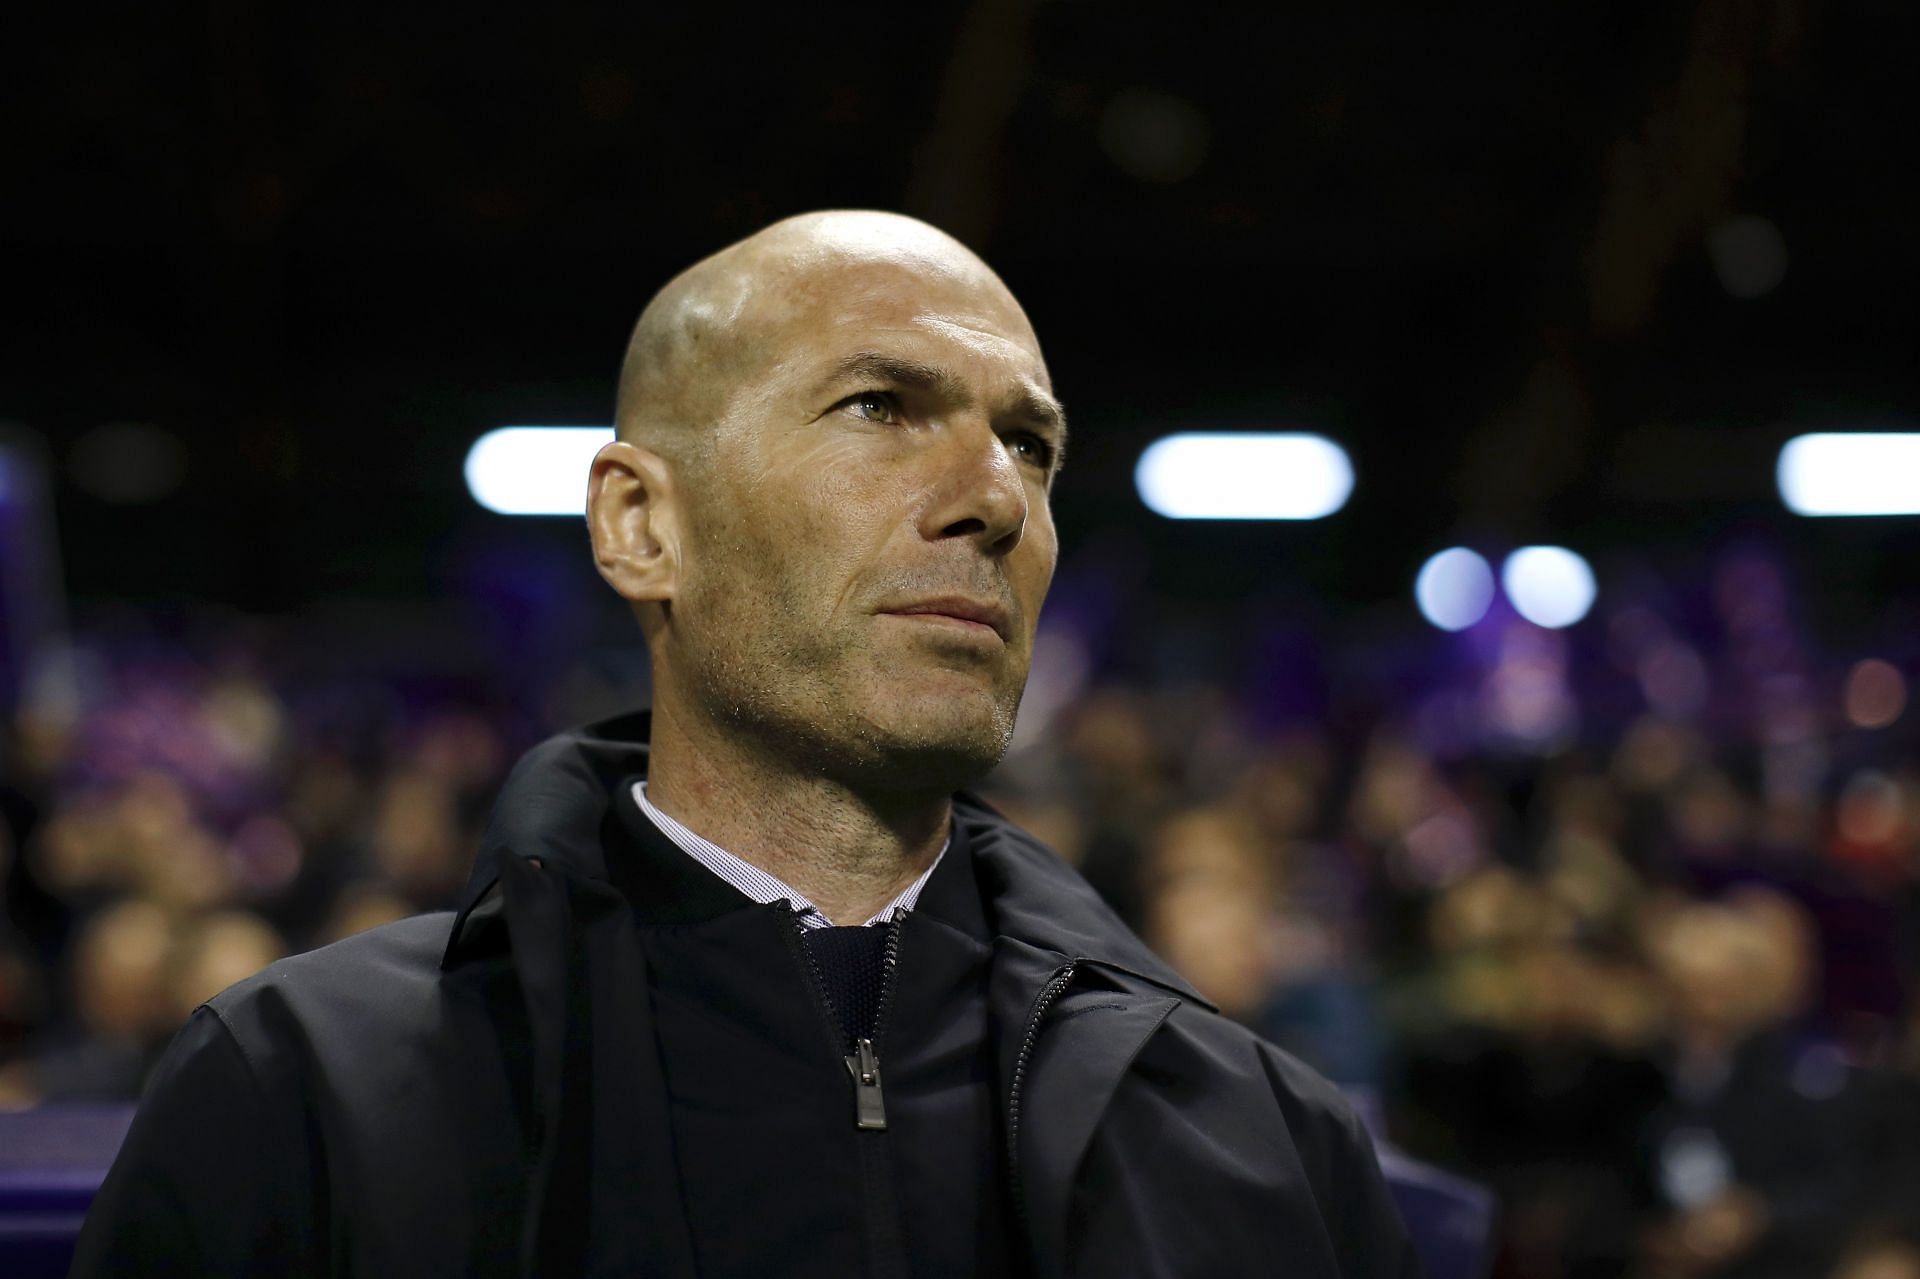 Zinedine Zidane is the only manager in history to complete the Champions League three-peat with Real Madrid.